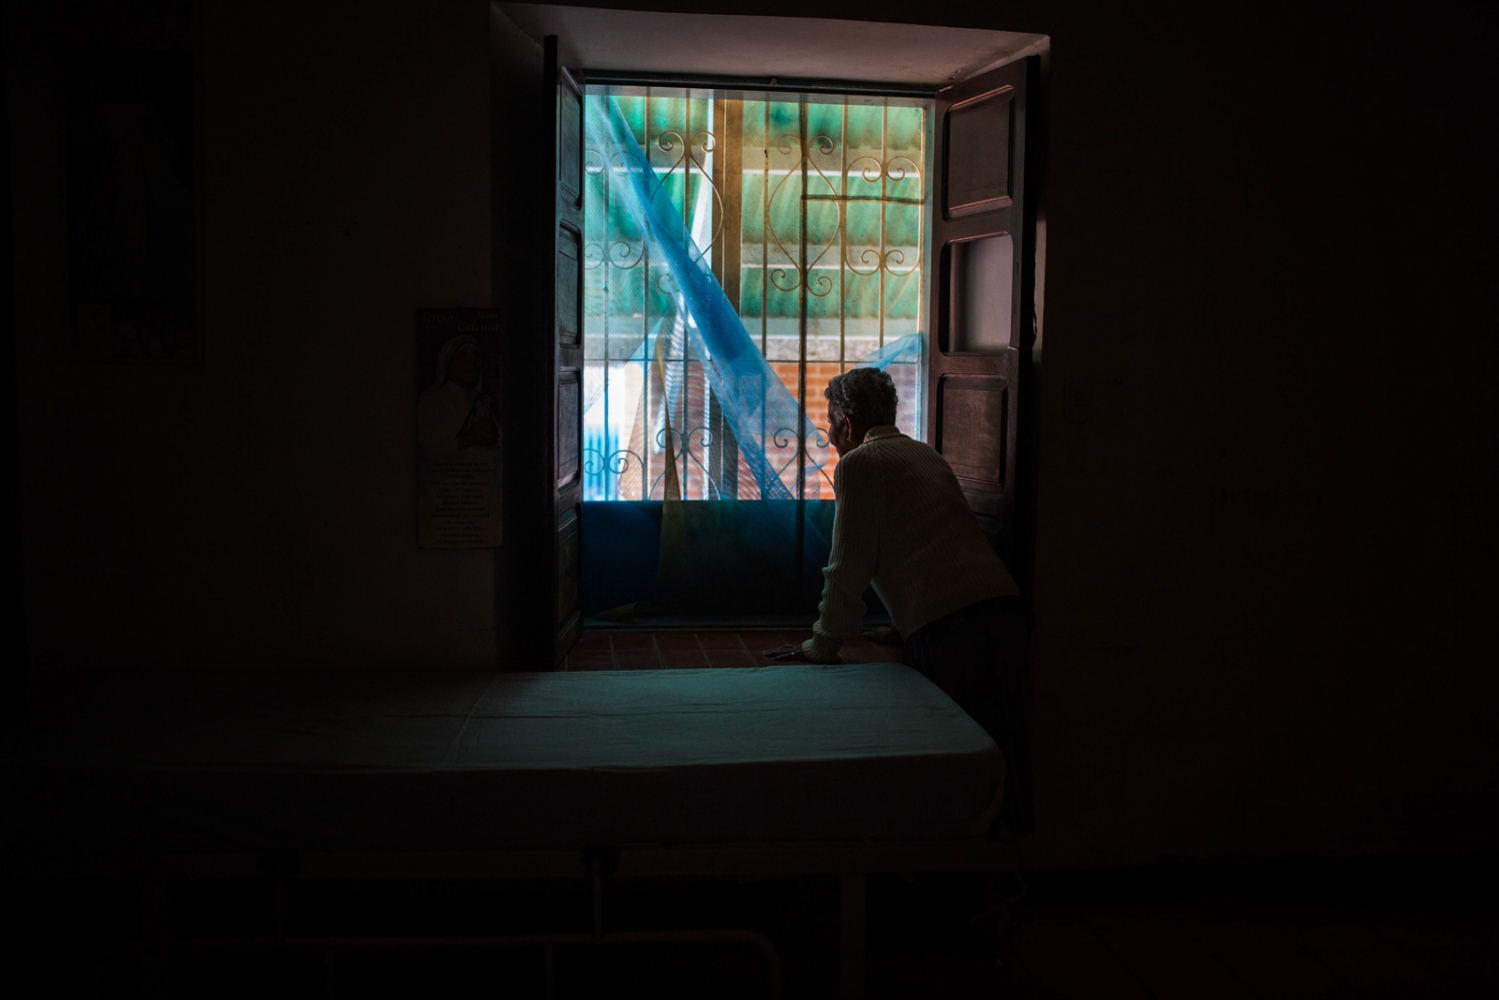  A patient watches though the w...in Mamera Caracas May 10, 2018 